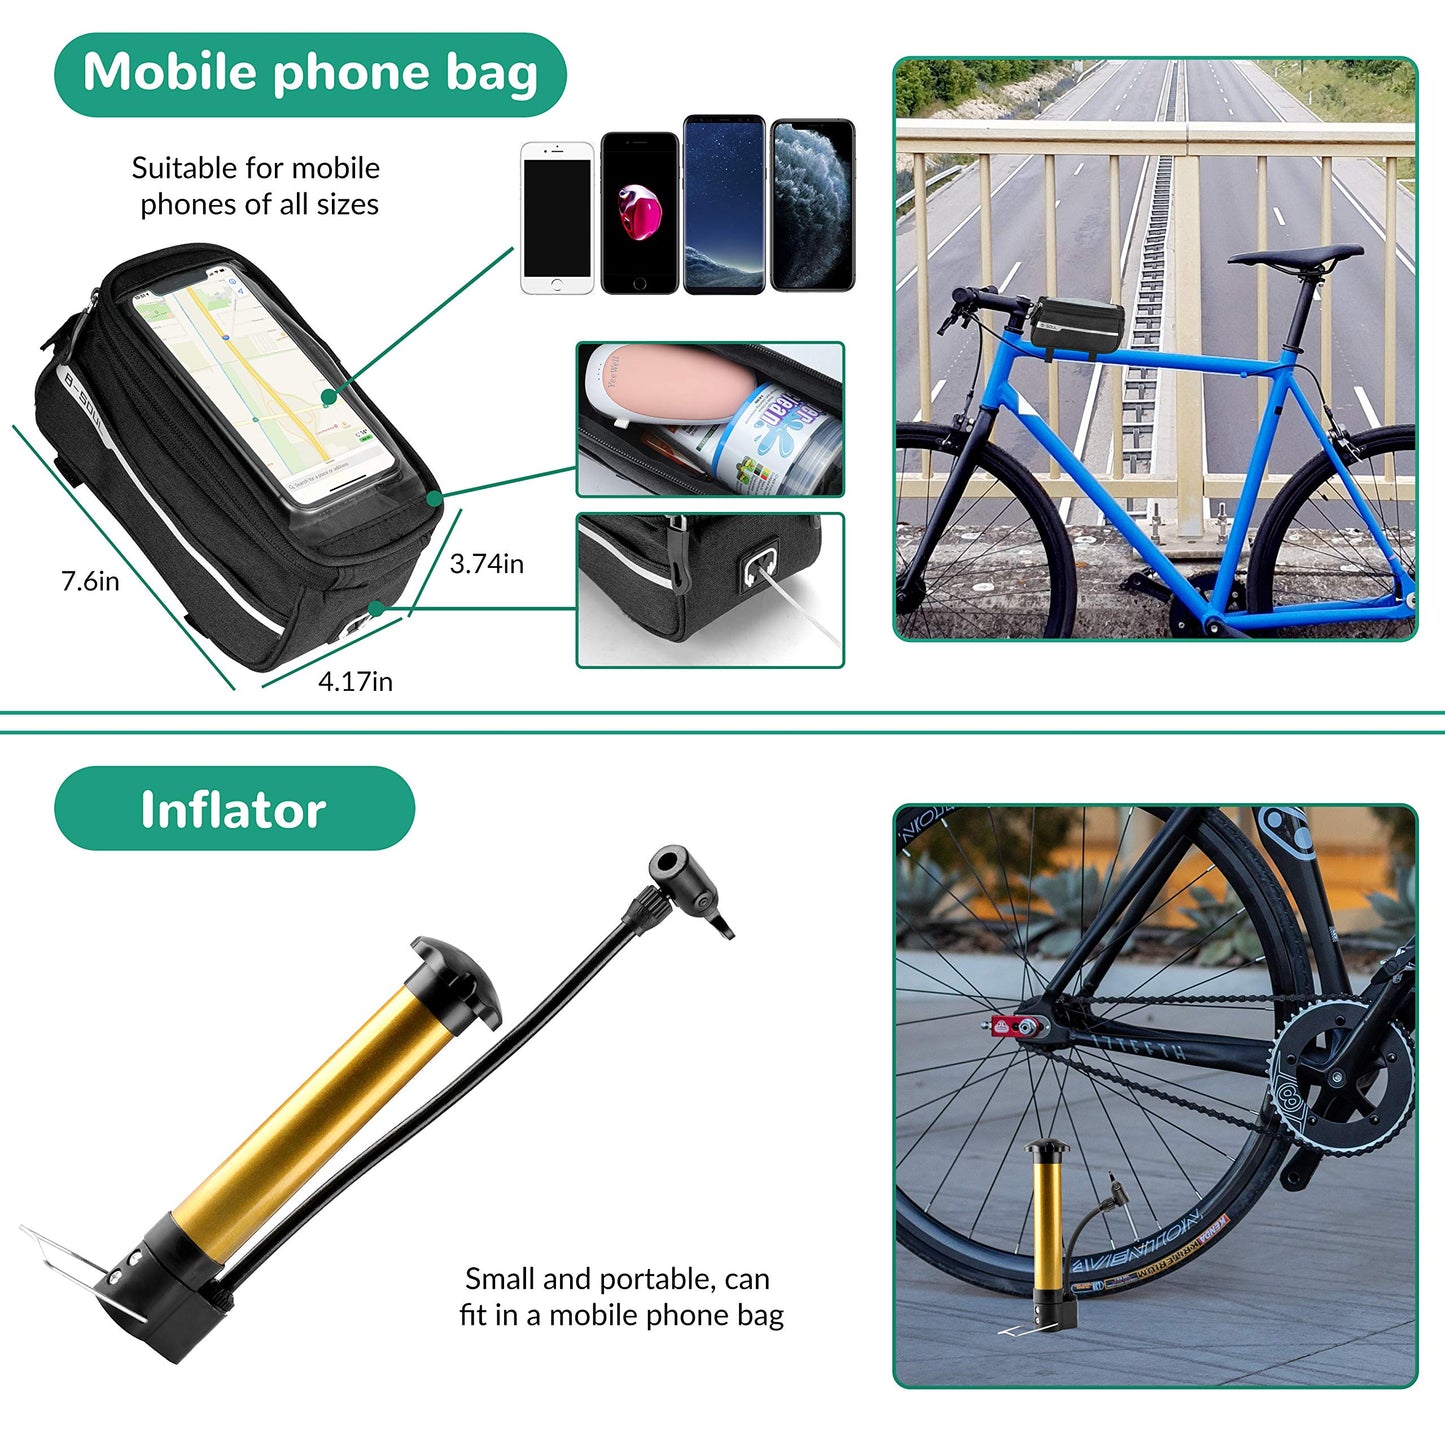 8 Pack Bicycle Accessories, Bike Light Set USB Rechargeable, 1 Bike Water Bottle Holder, Bike Bag and 1 Bike Aluminum Bicycle Bell,Pump